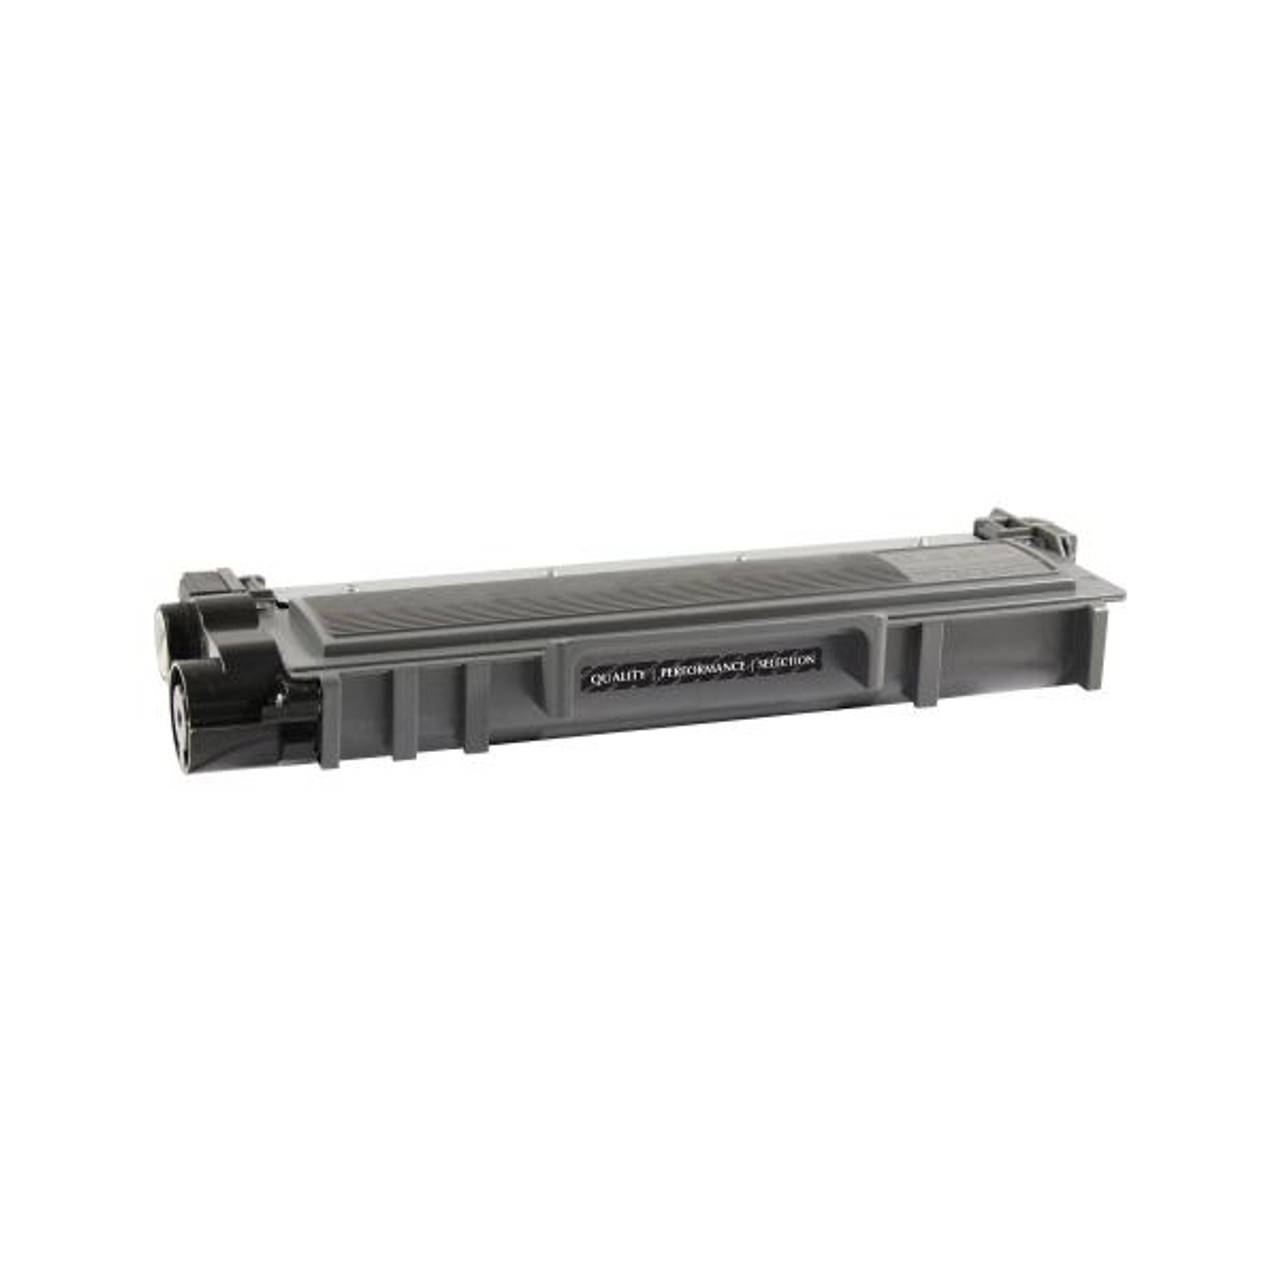 Toner Cartridge for Brother TN630-1